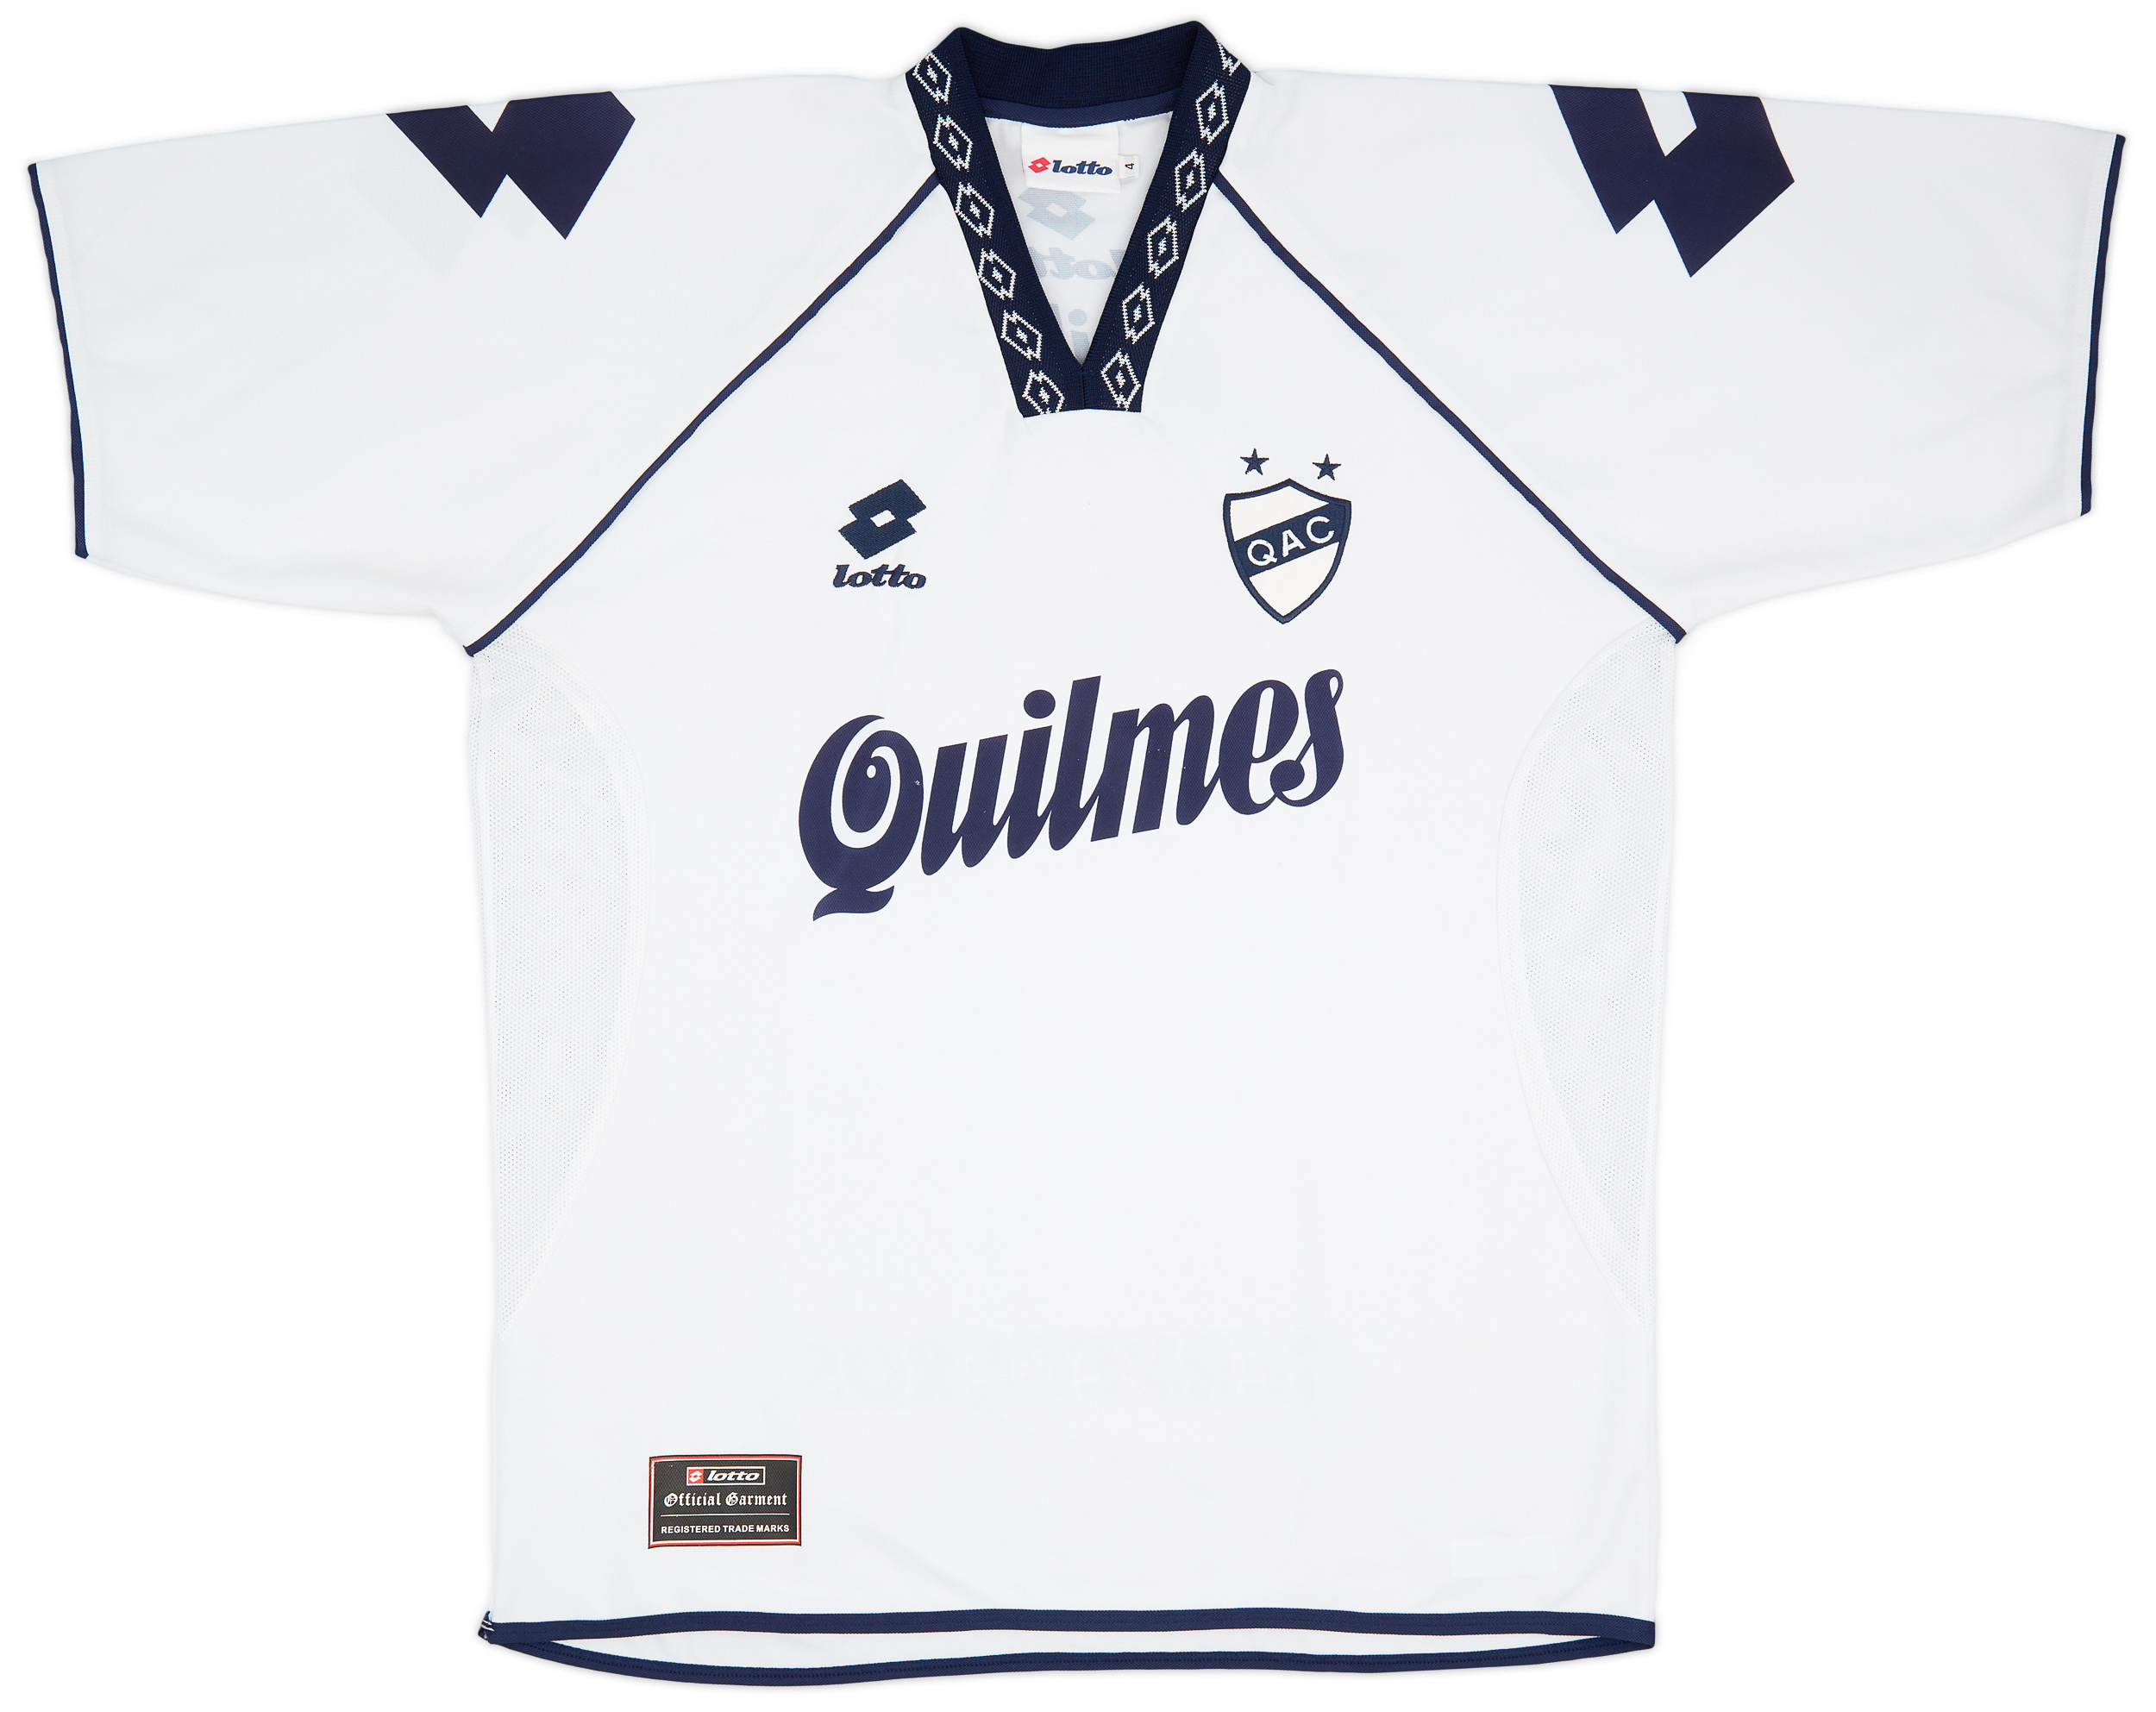 2002-03 Quilmes Home Shirt - 9/10 - ()